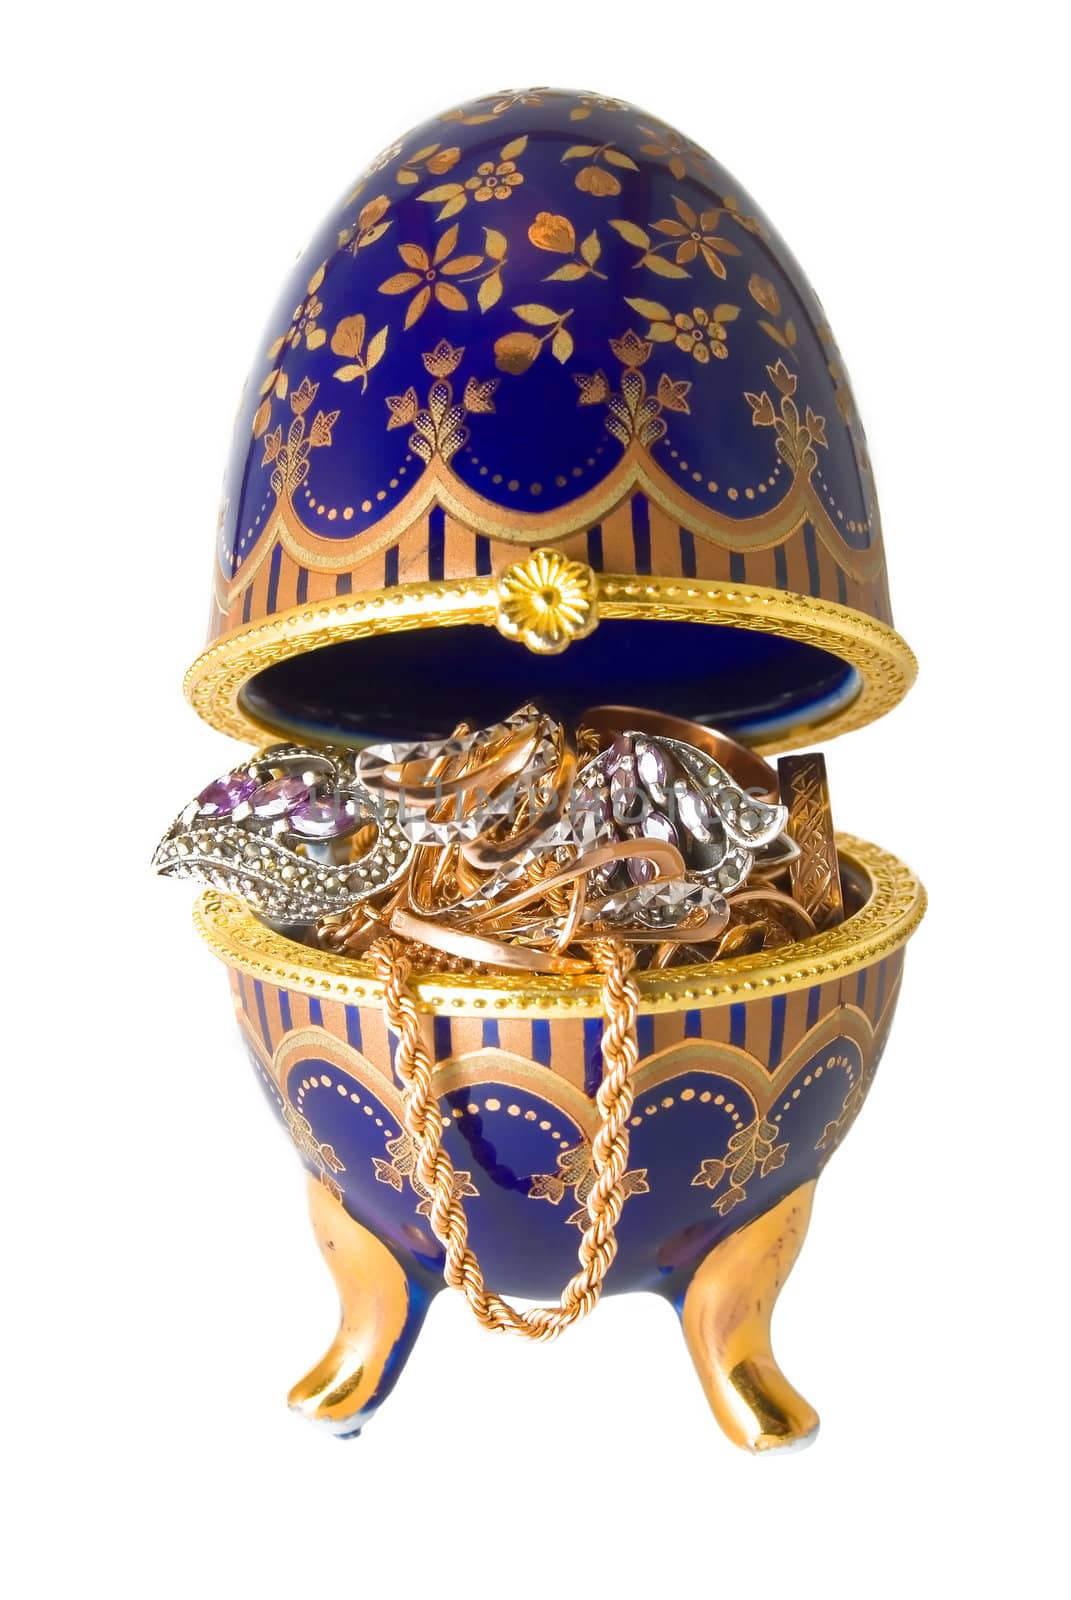 Gold ornaments are photographed in a casket in the form of egg